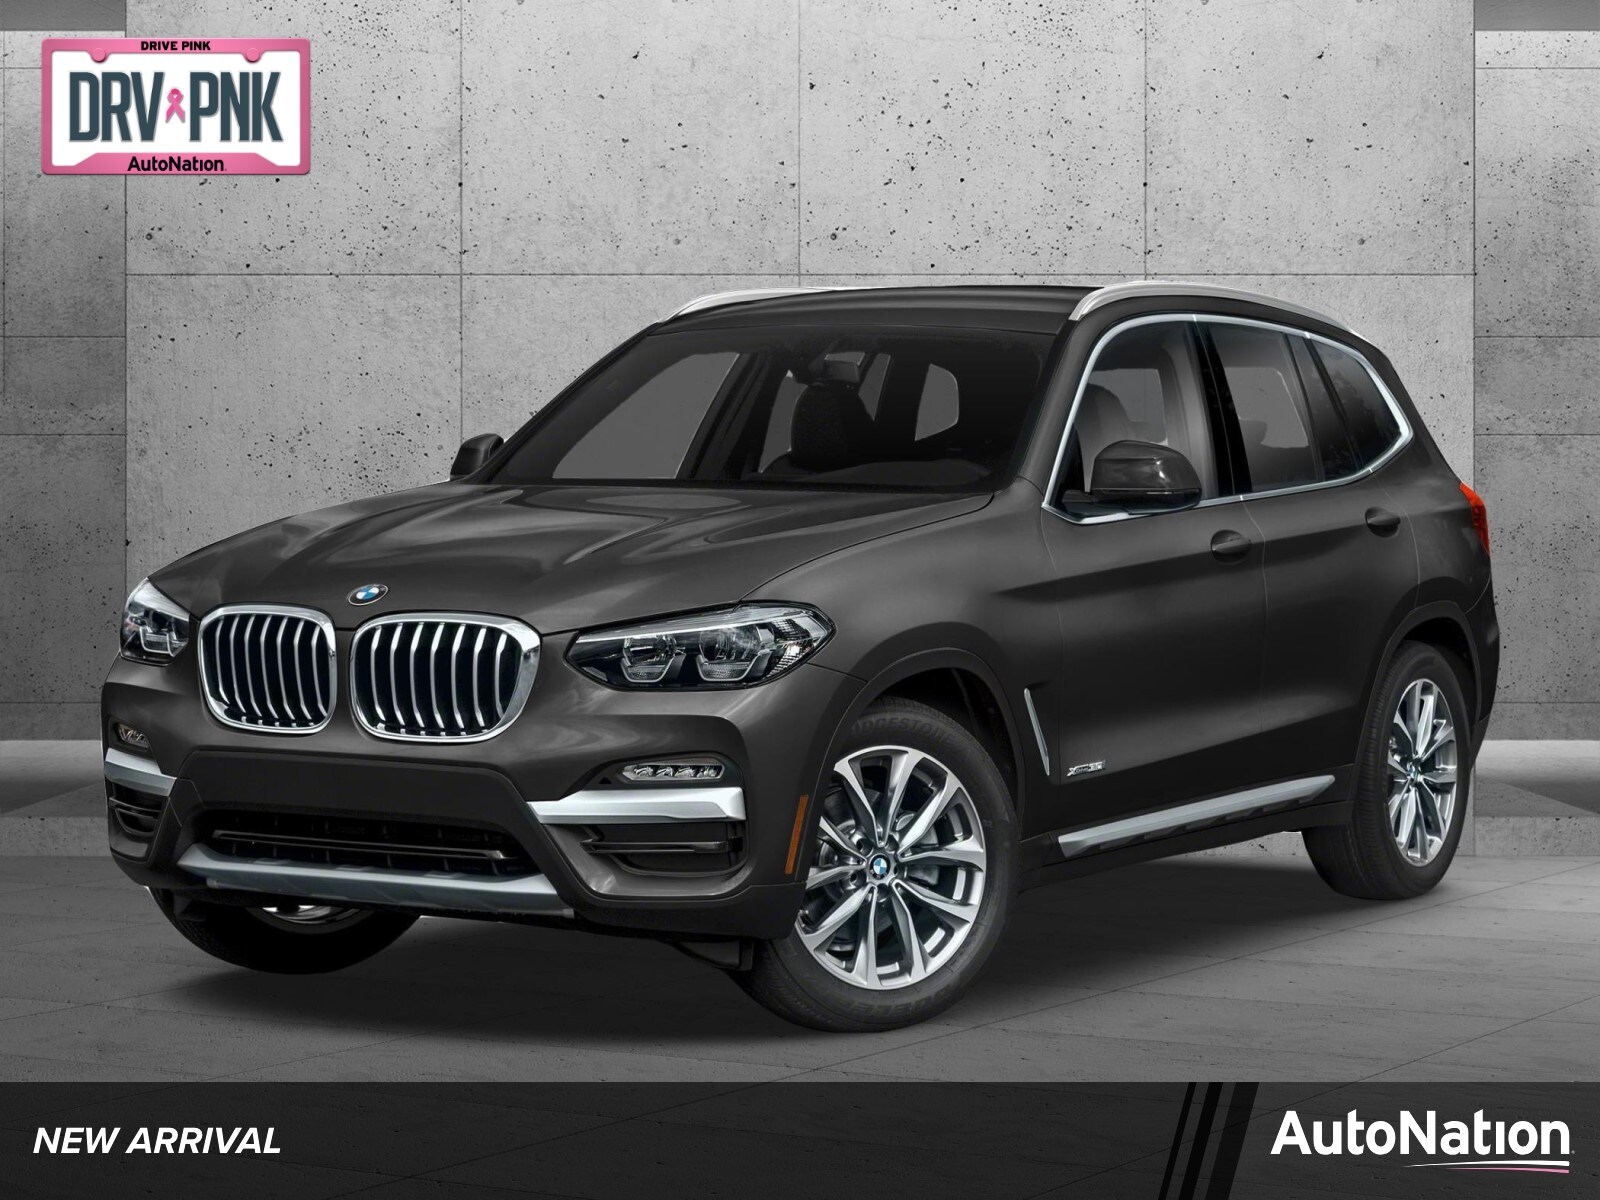 Used Bmw X3 Mountain View Ca